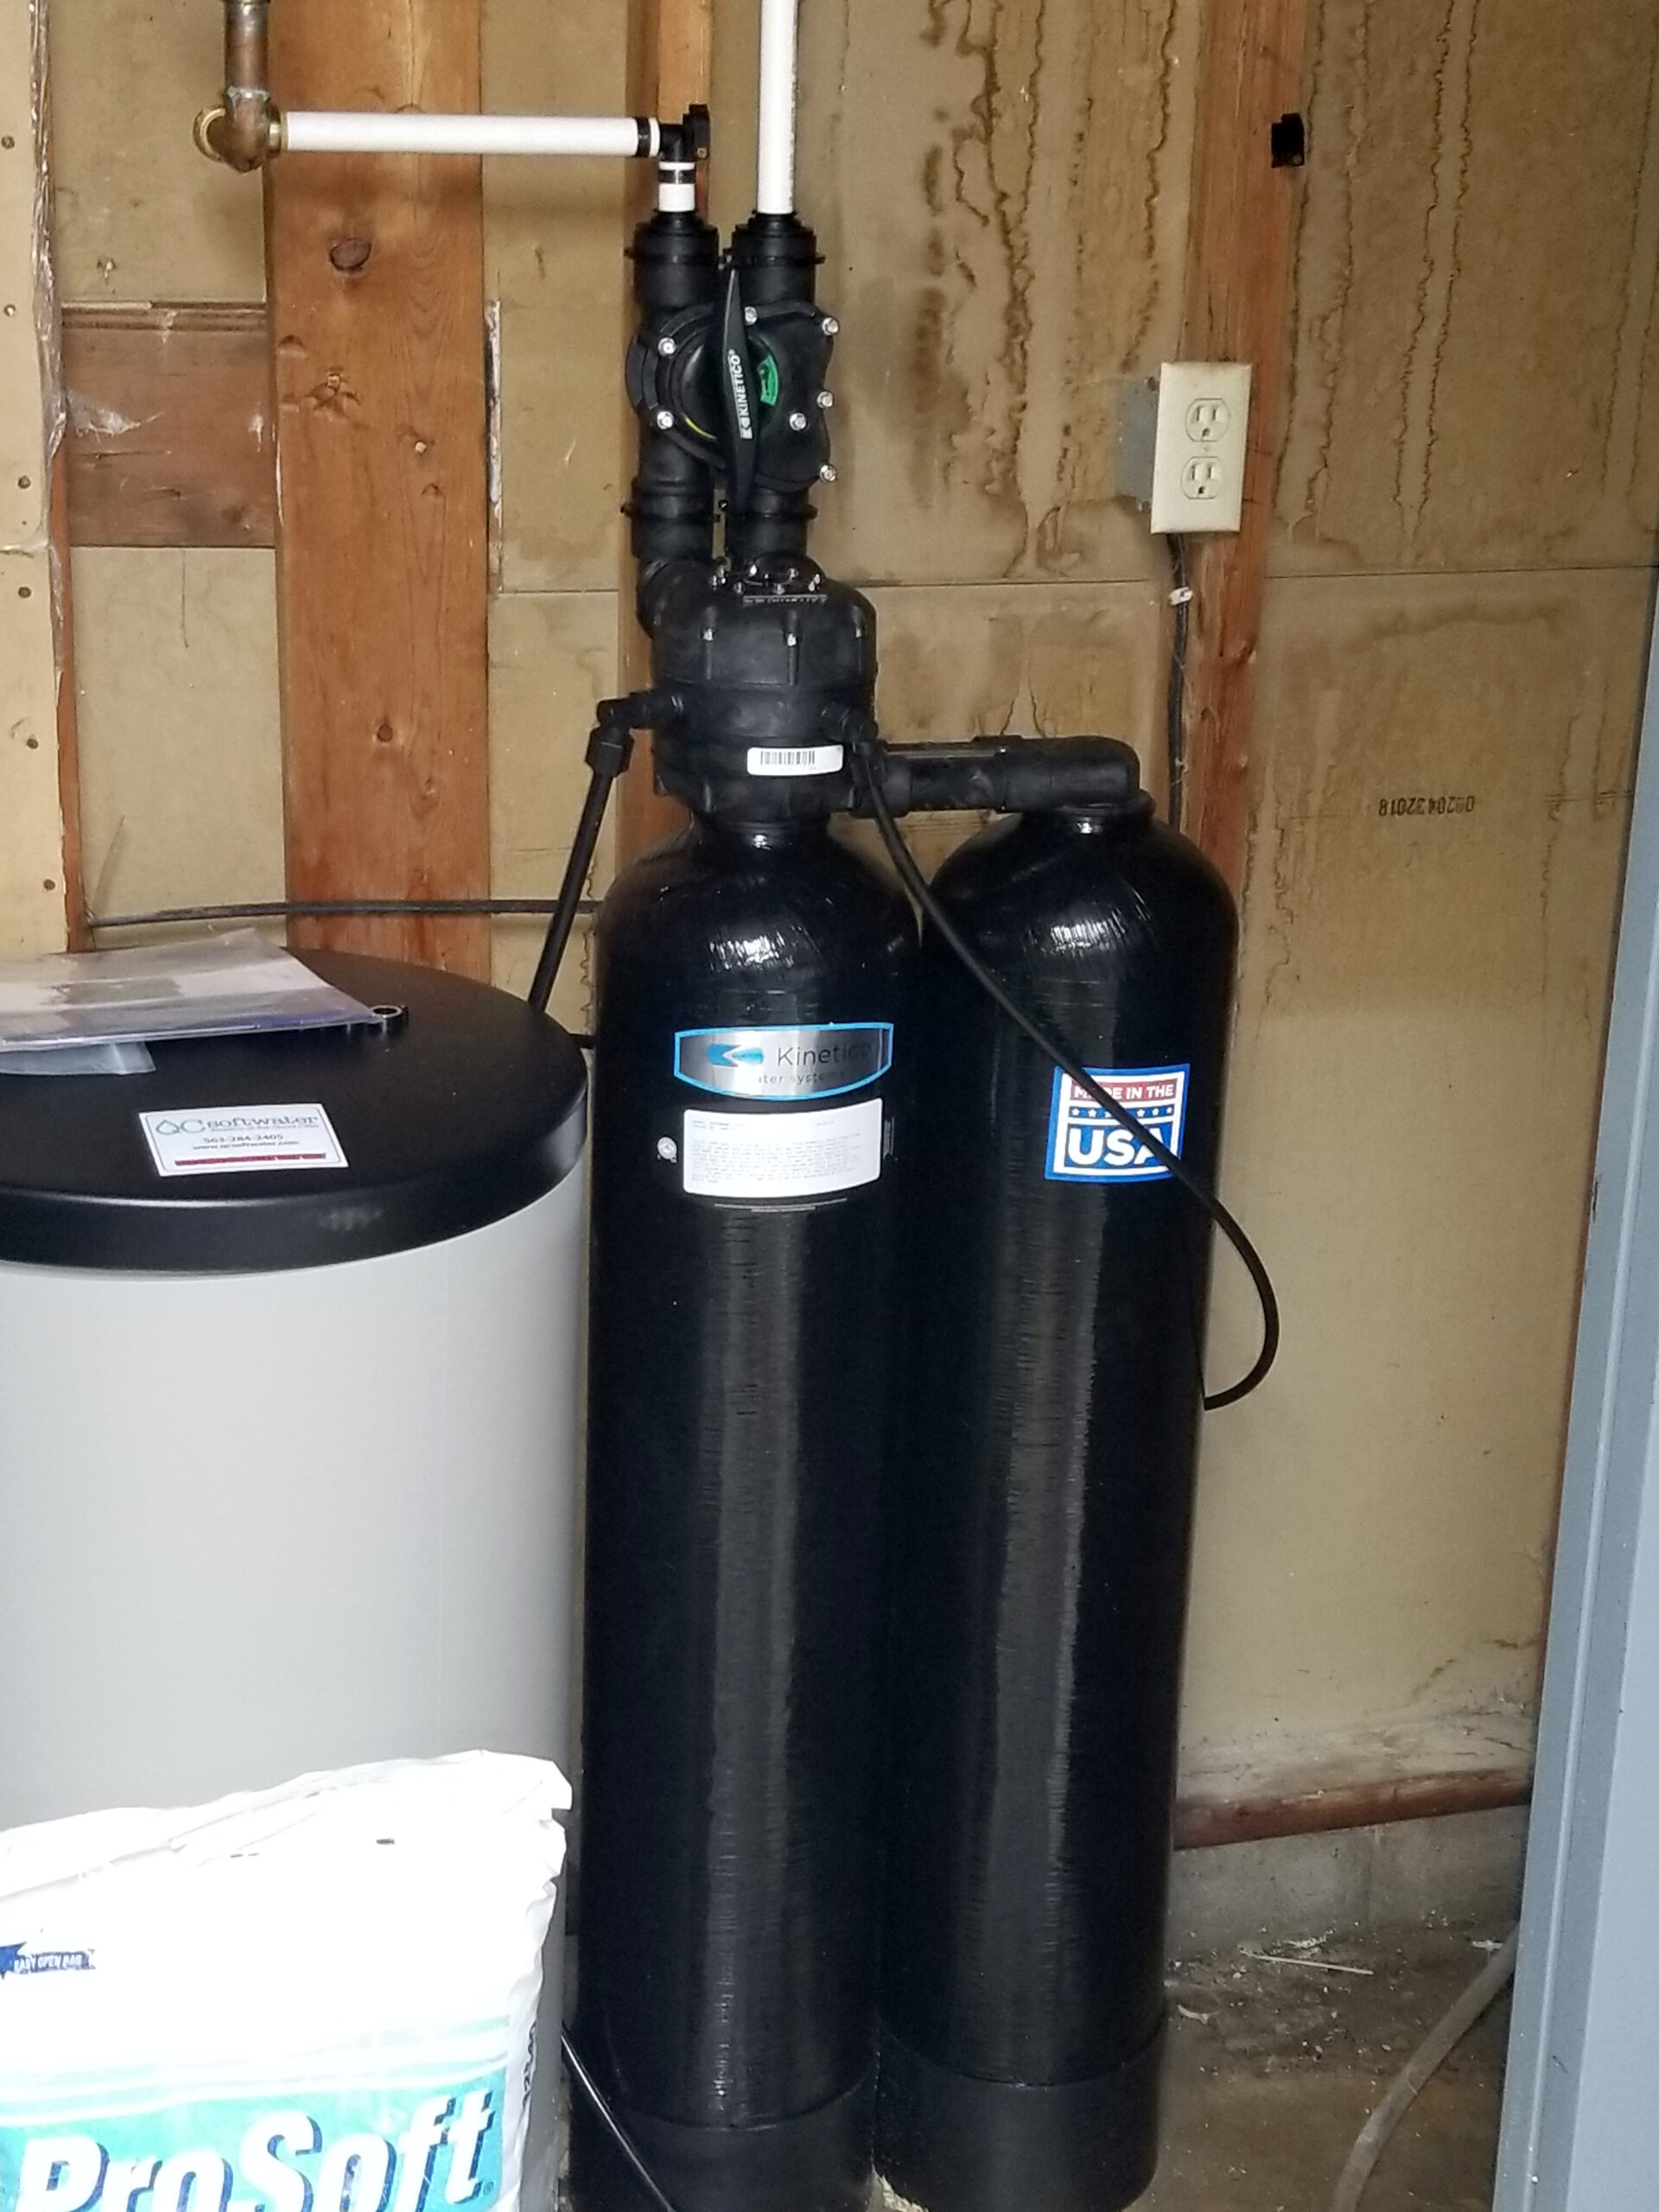 We installed one Kinetico water softener to replace three water systems by another brand